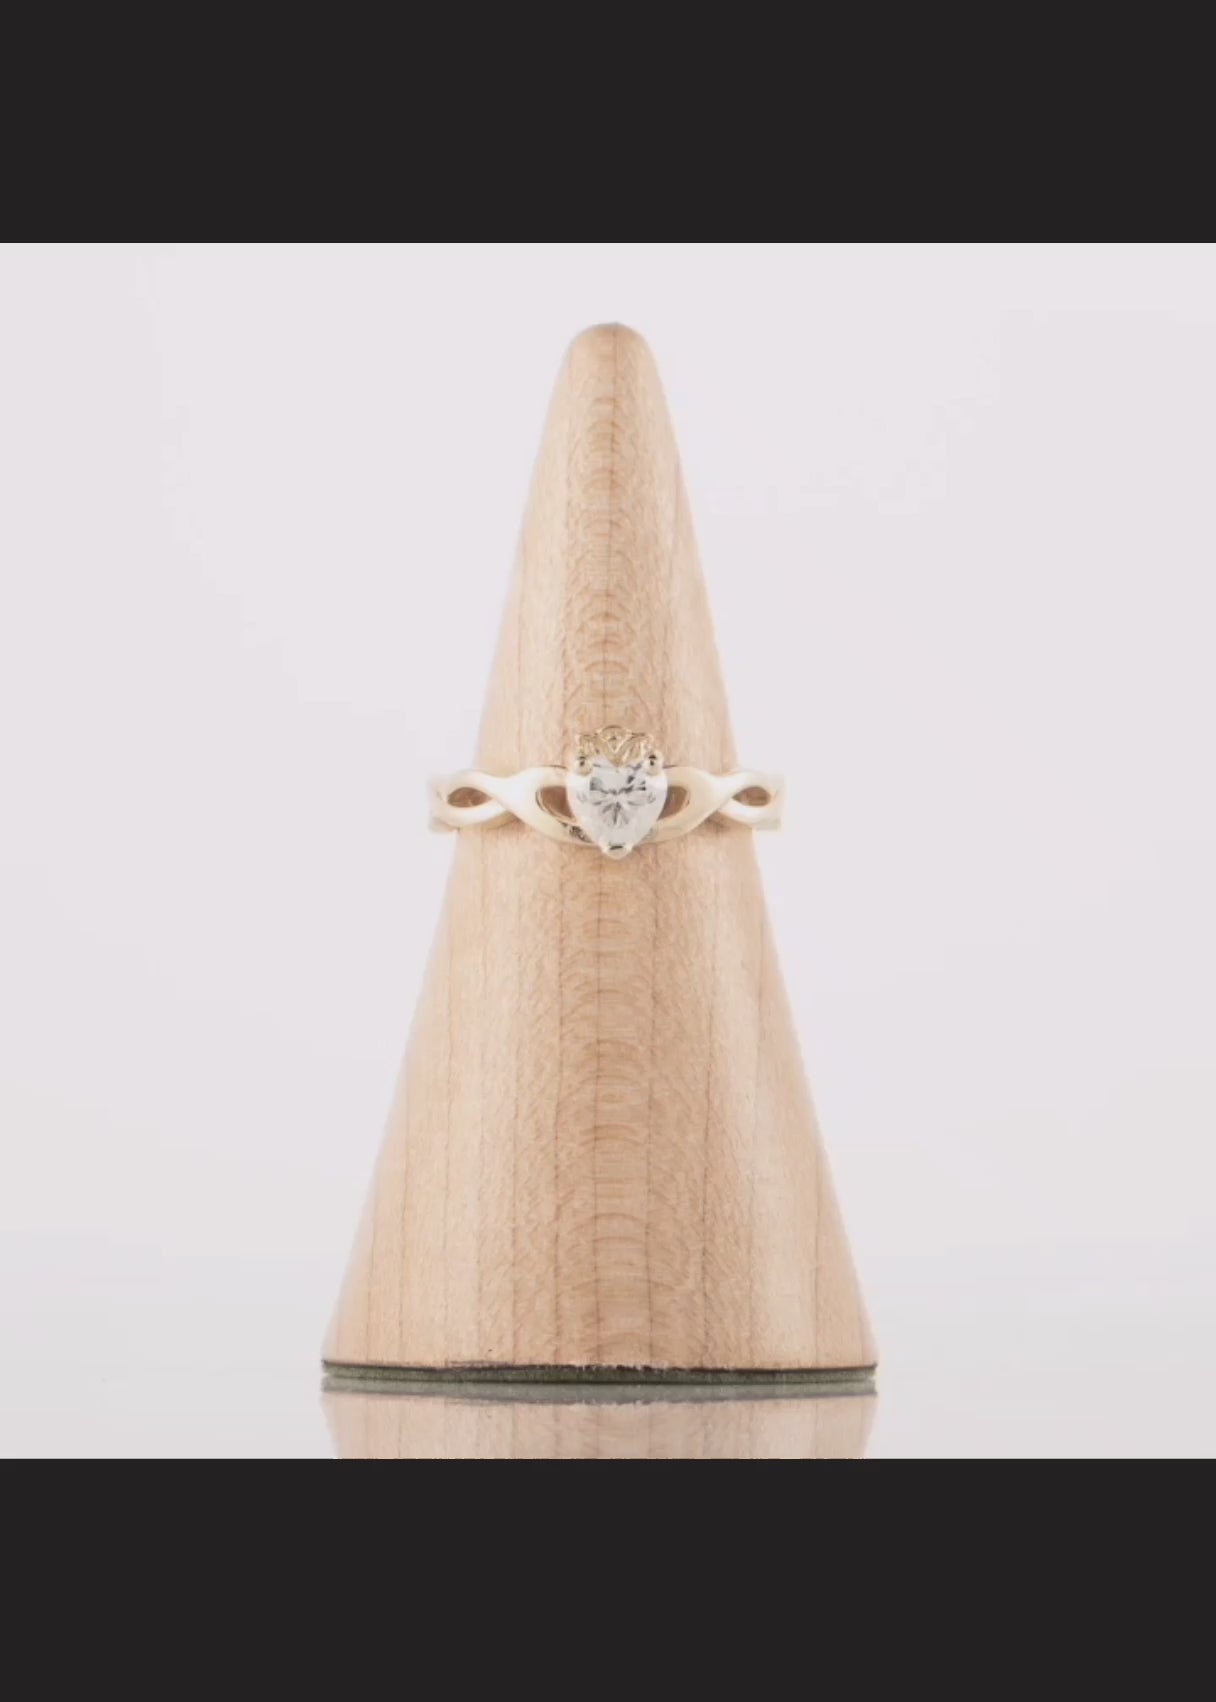 360 degree video of a diamond Claddagh Ring in gold. The video shows the double twist weave band